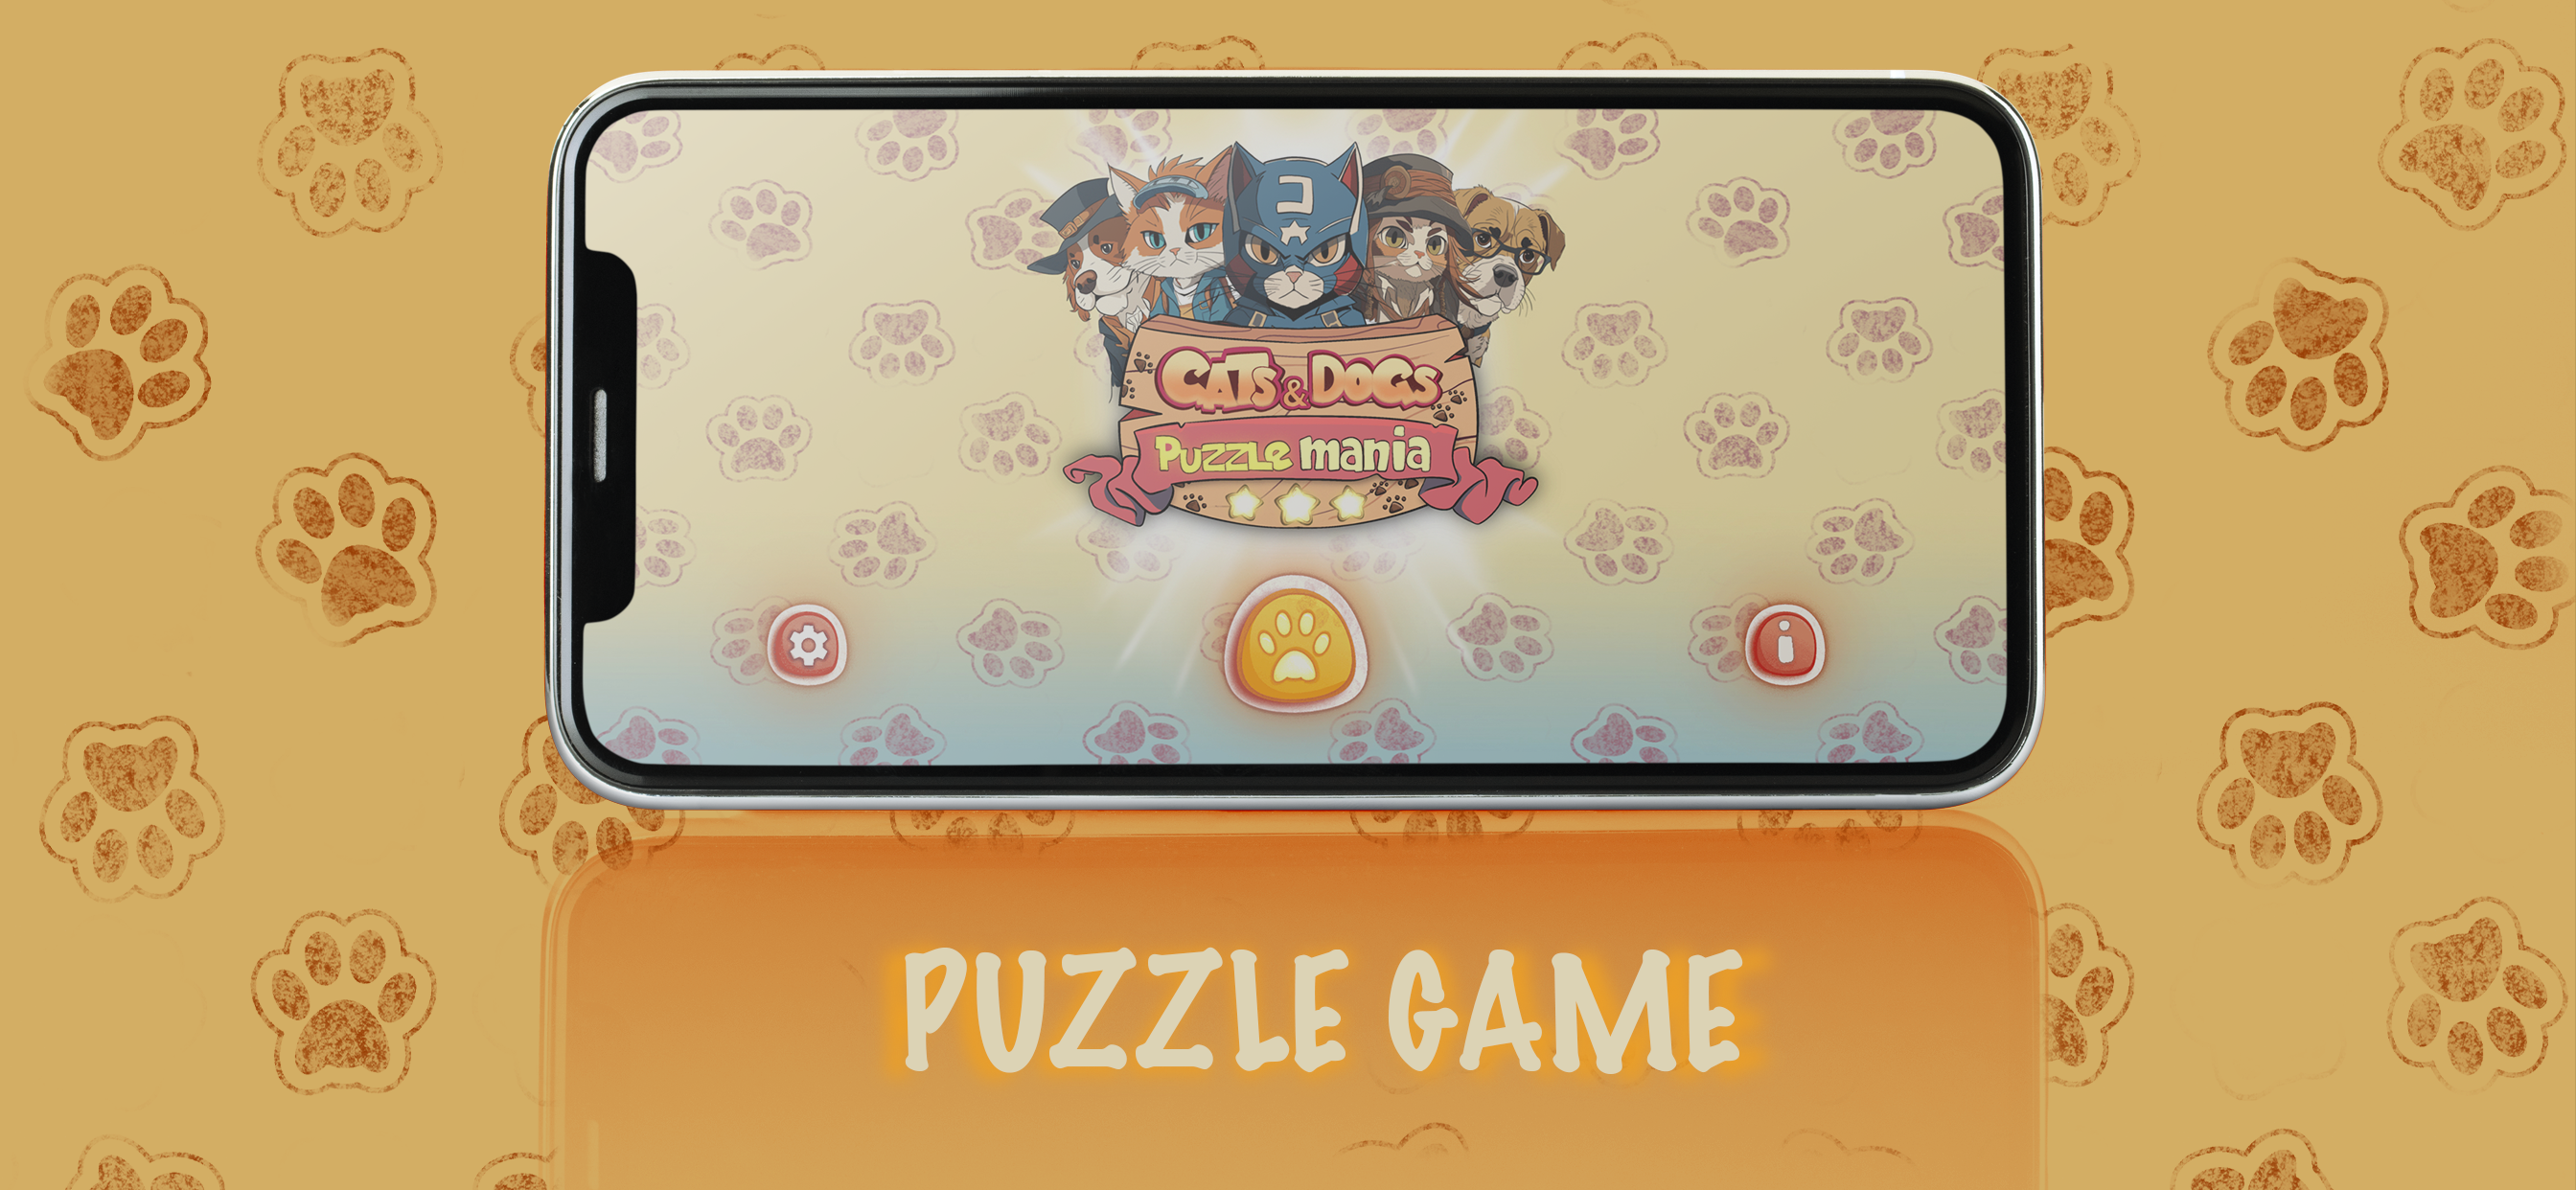 Screenshot 1 of Cats & Dogs Puzzle Mania 2.27